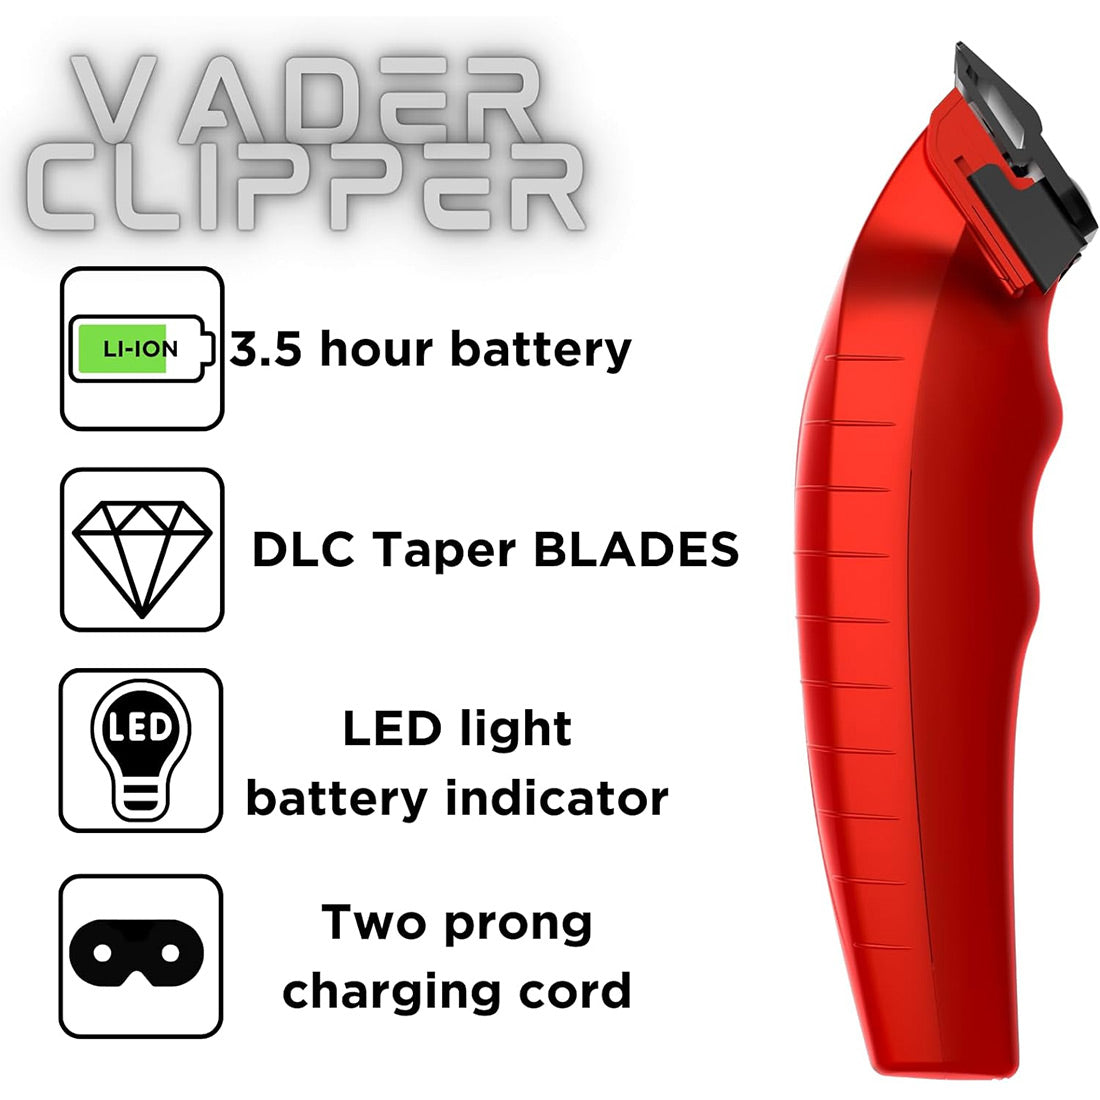 Supreme Trimmer Vader Clipper with DLC Taper Blade STC5098